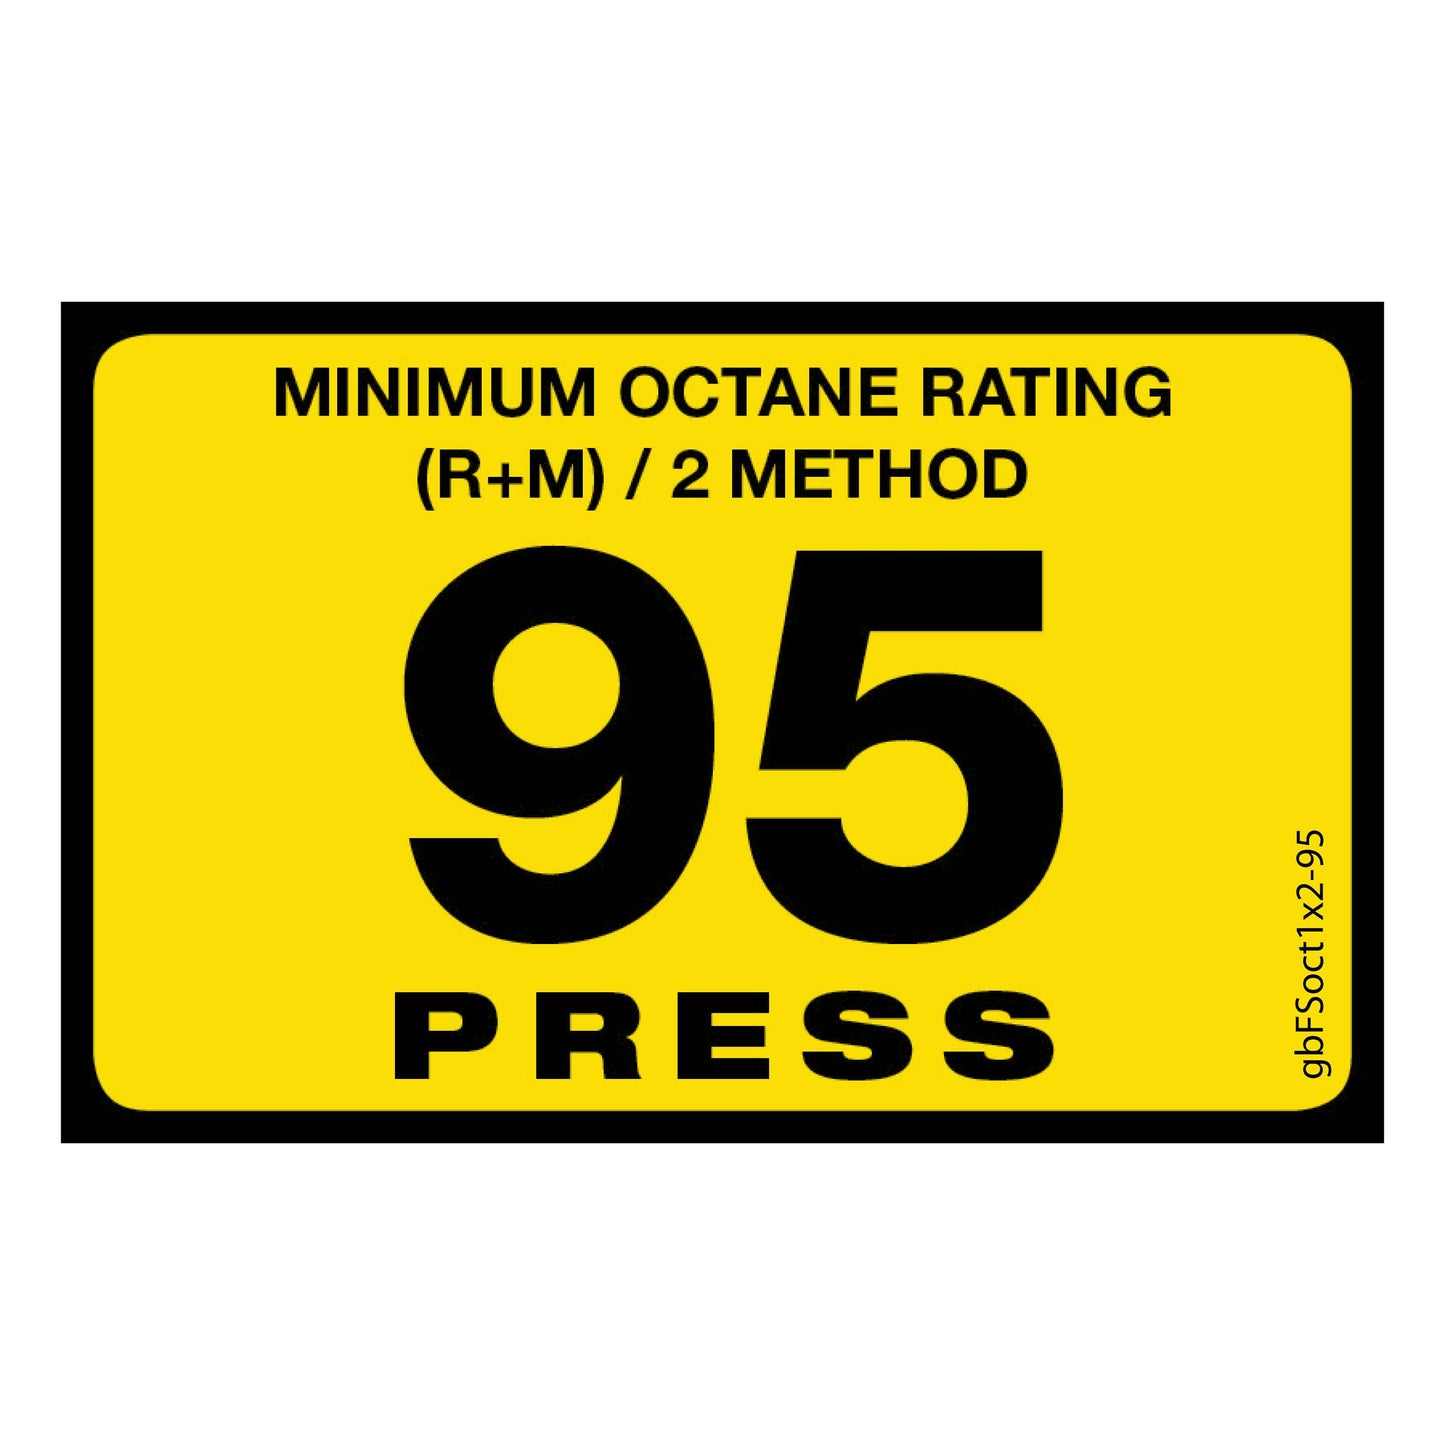 95 Press Octane Rating Decal. 1 inch by 2 inches in size. 